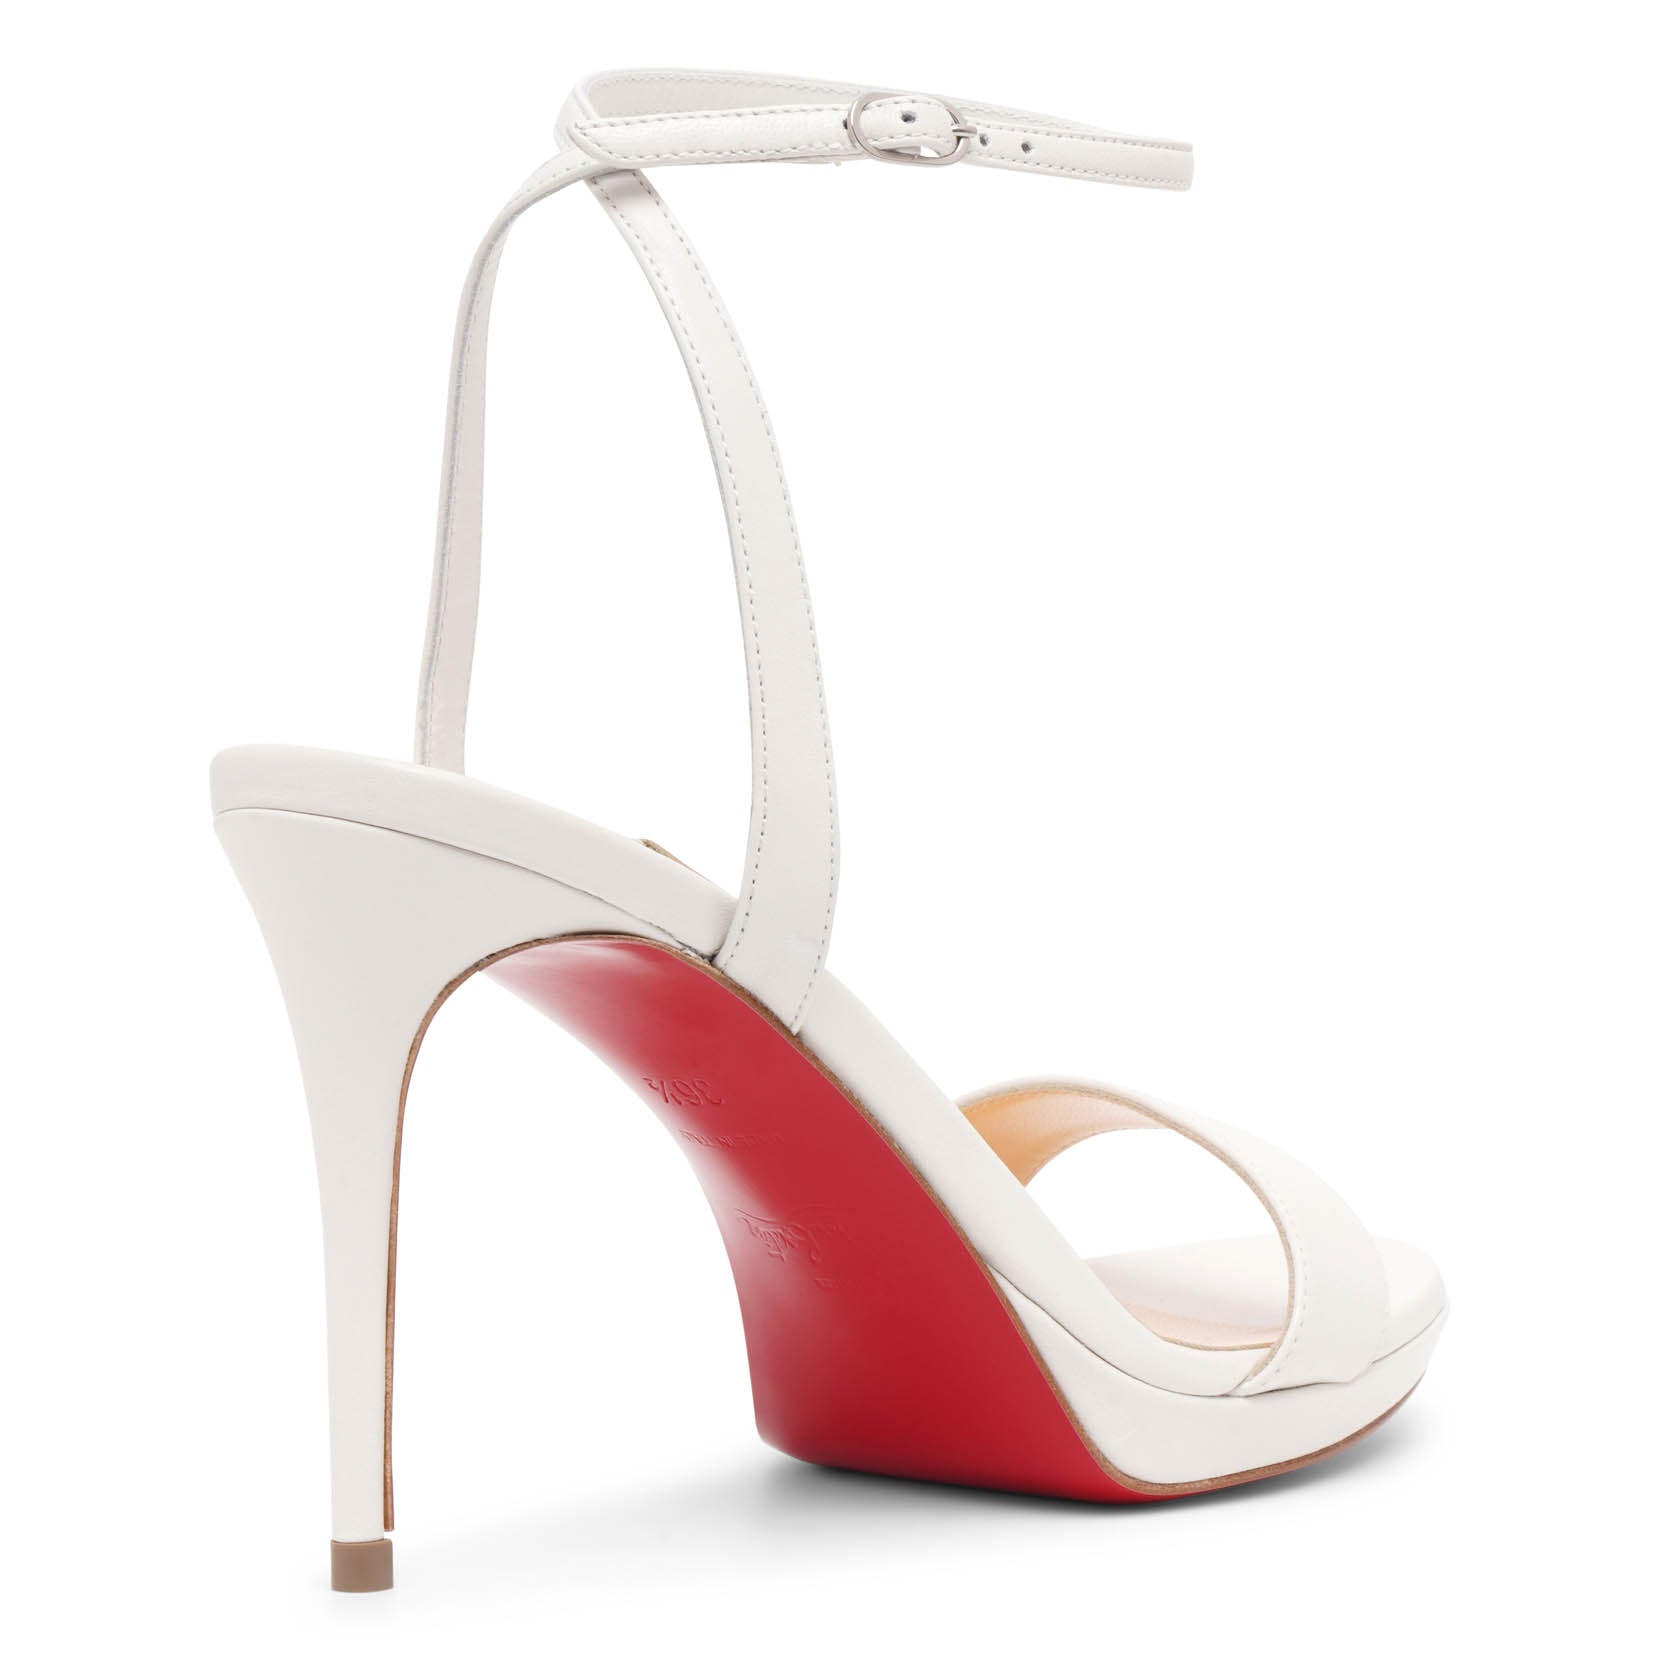 Loubi Queen 100 white leather sandals